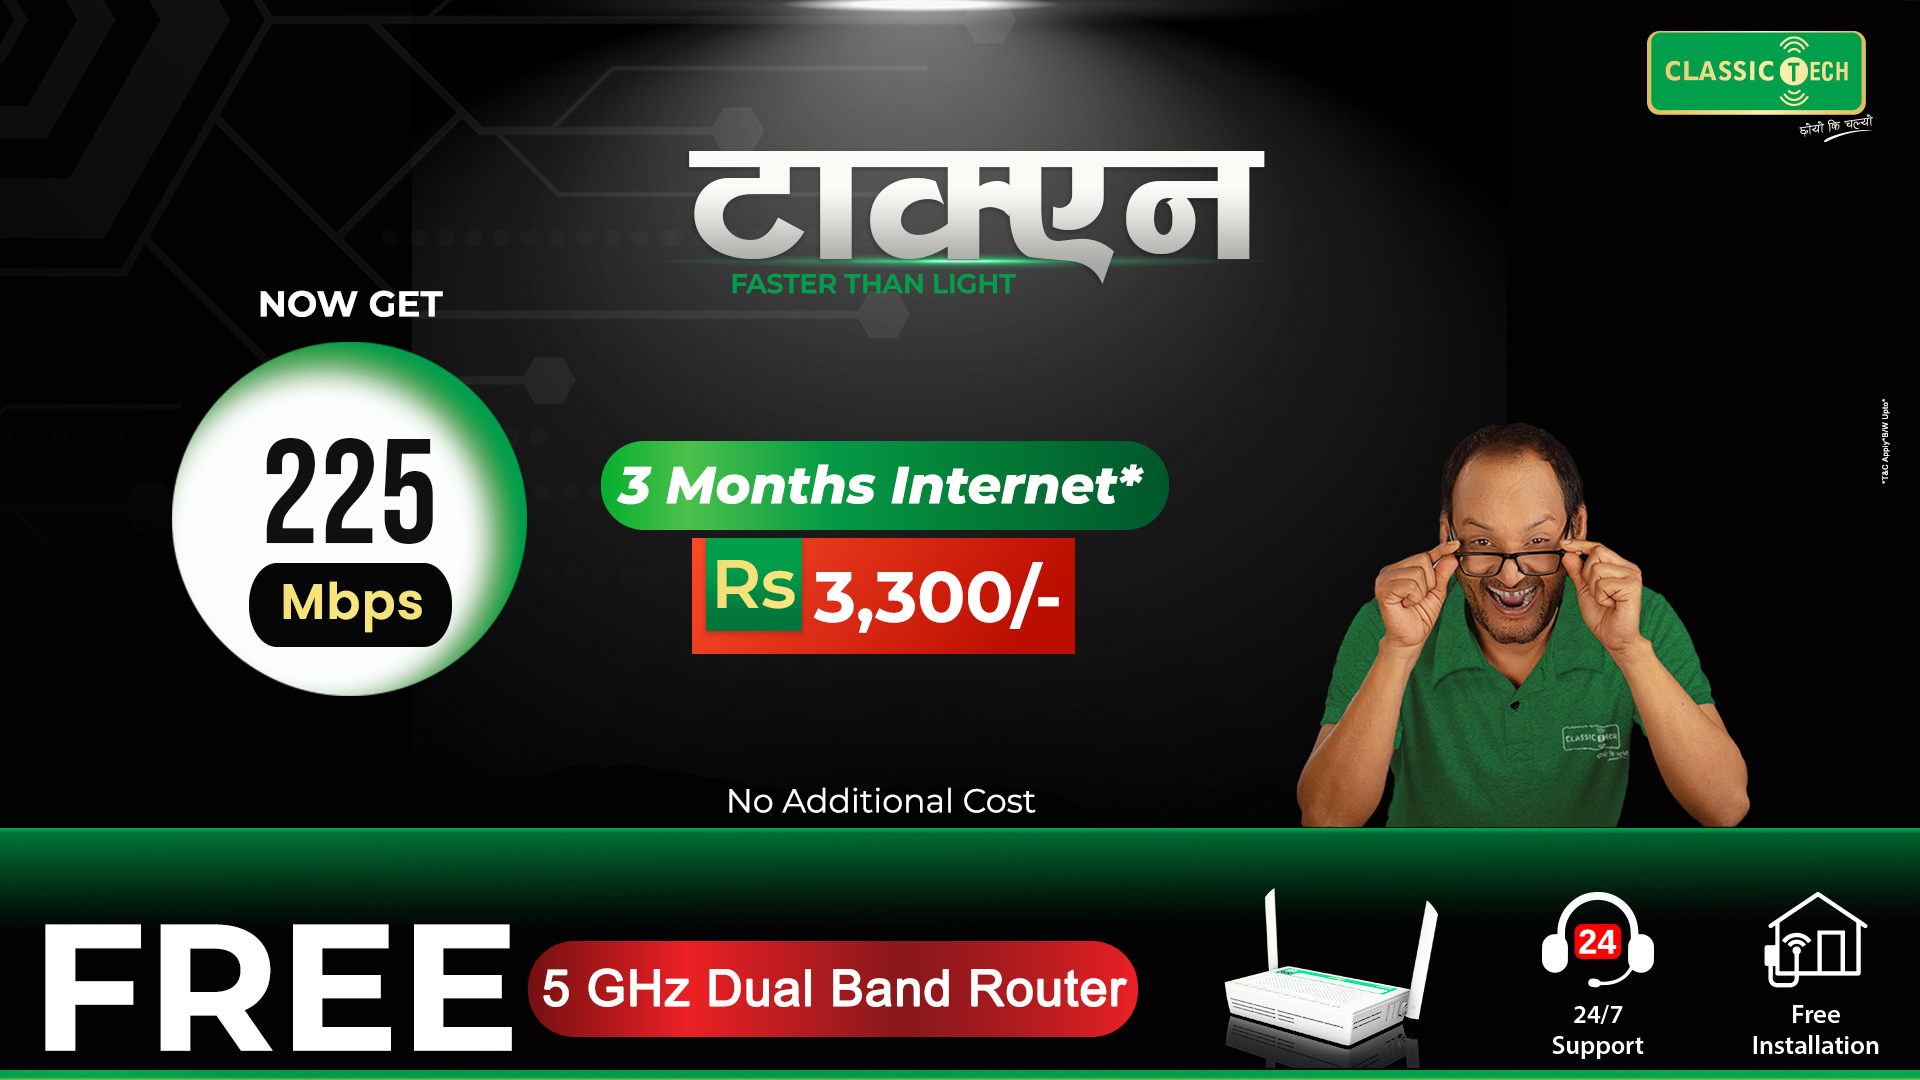 Classic Tech TACHYON Package: 225 Mbps for 3 months free dual band router at Rs 3300.